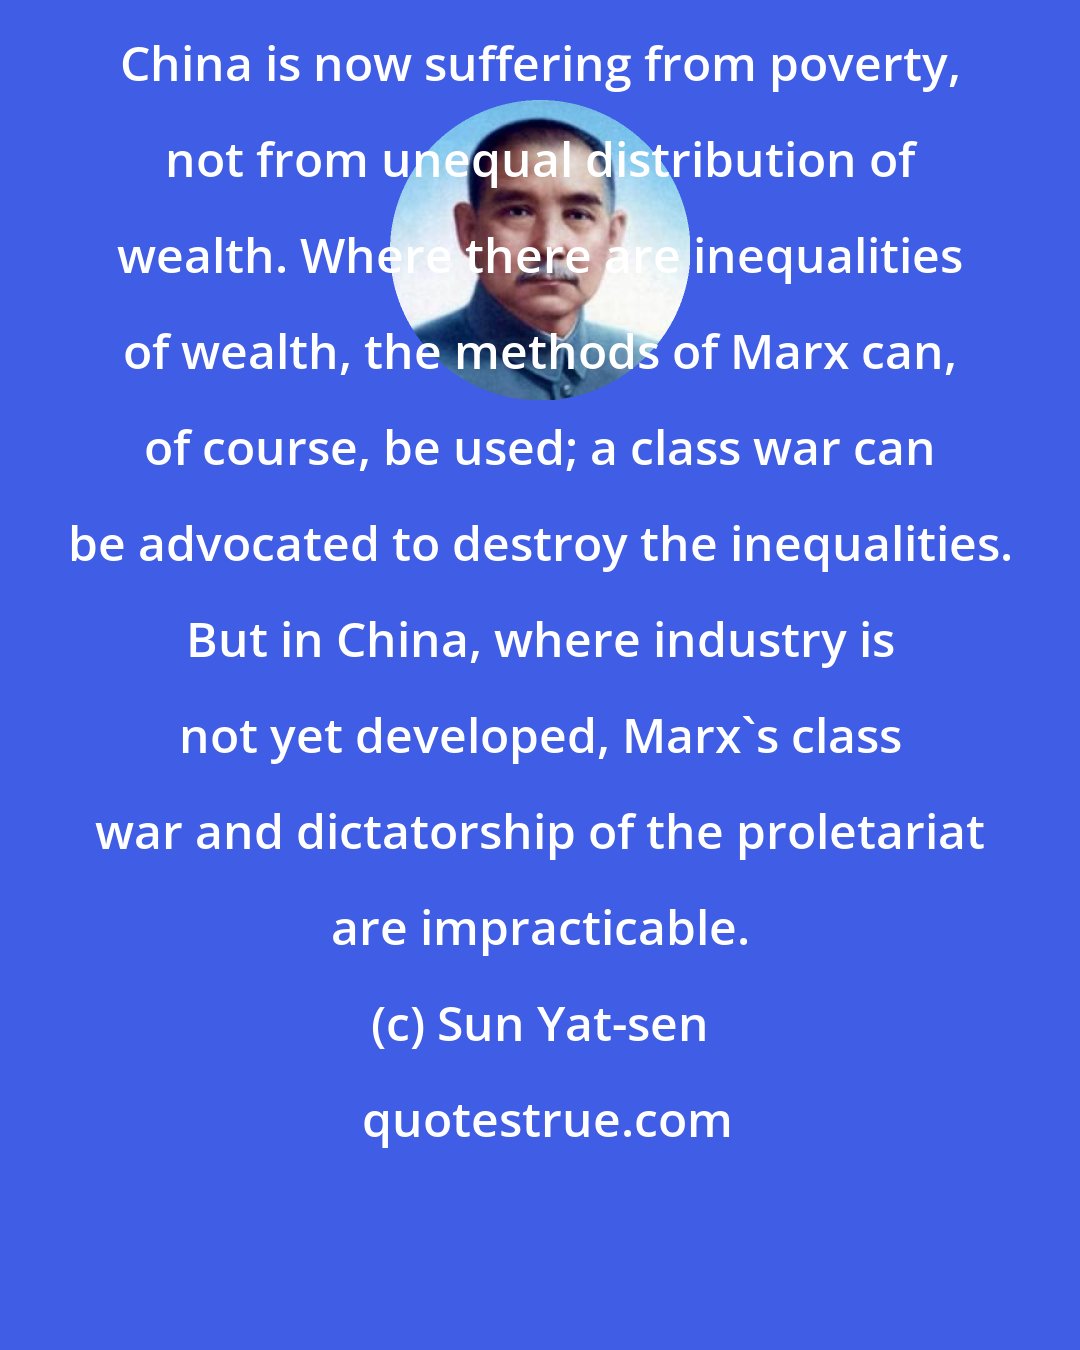 Sun Yat-sen: China is now suffering from poverty, not from unequal distribution of wealth. Where there are inequalities of wealth, the methods of Marx can, of course, be used; a class war can be advocated to destroy the inequalities. But in China, where industry is not yet developed, Marx's class war and dictatorship of the proletariat are impracticable.